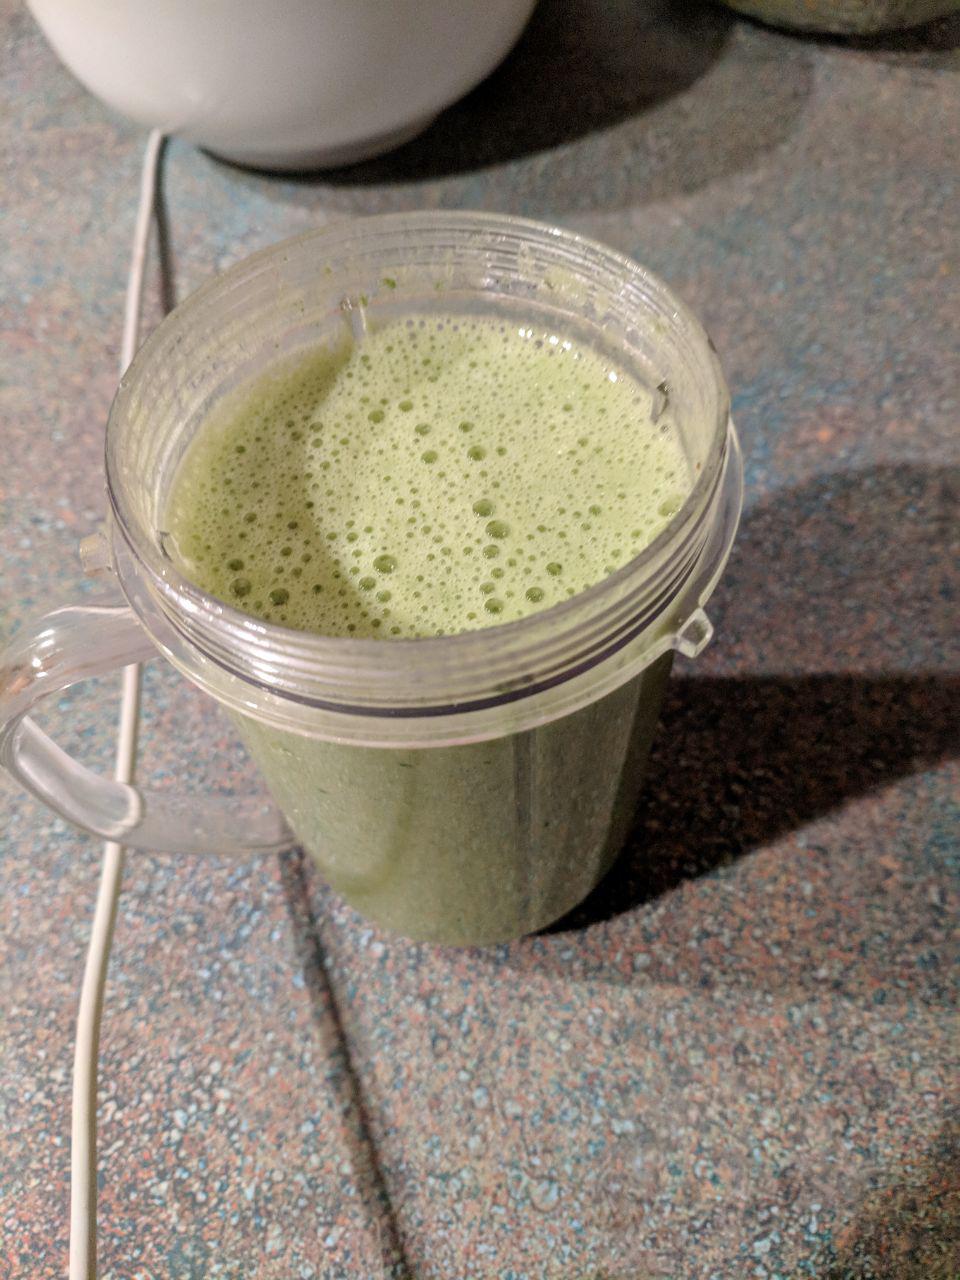 Kale and Cucumber Greens Juice Drink with Pulp 